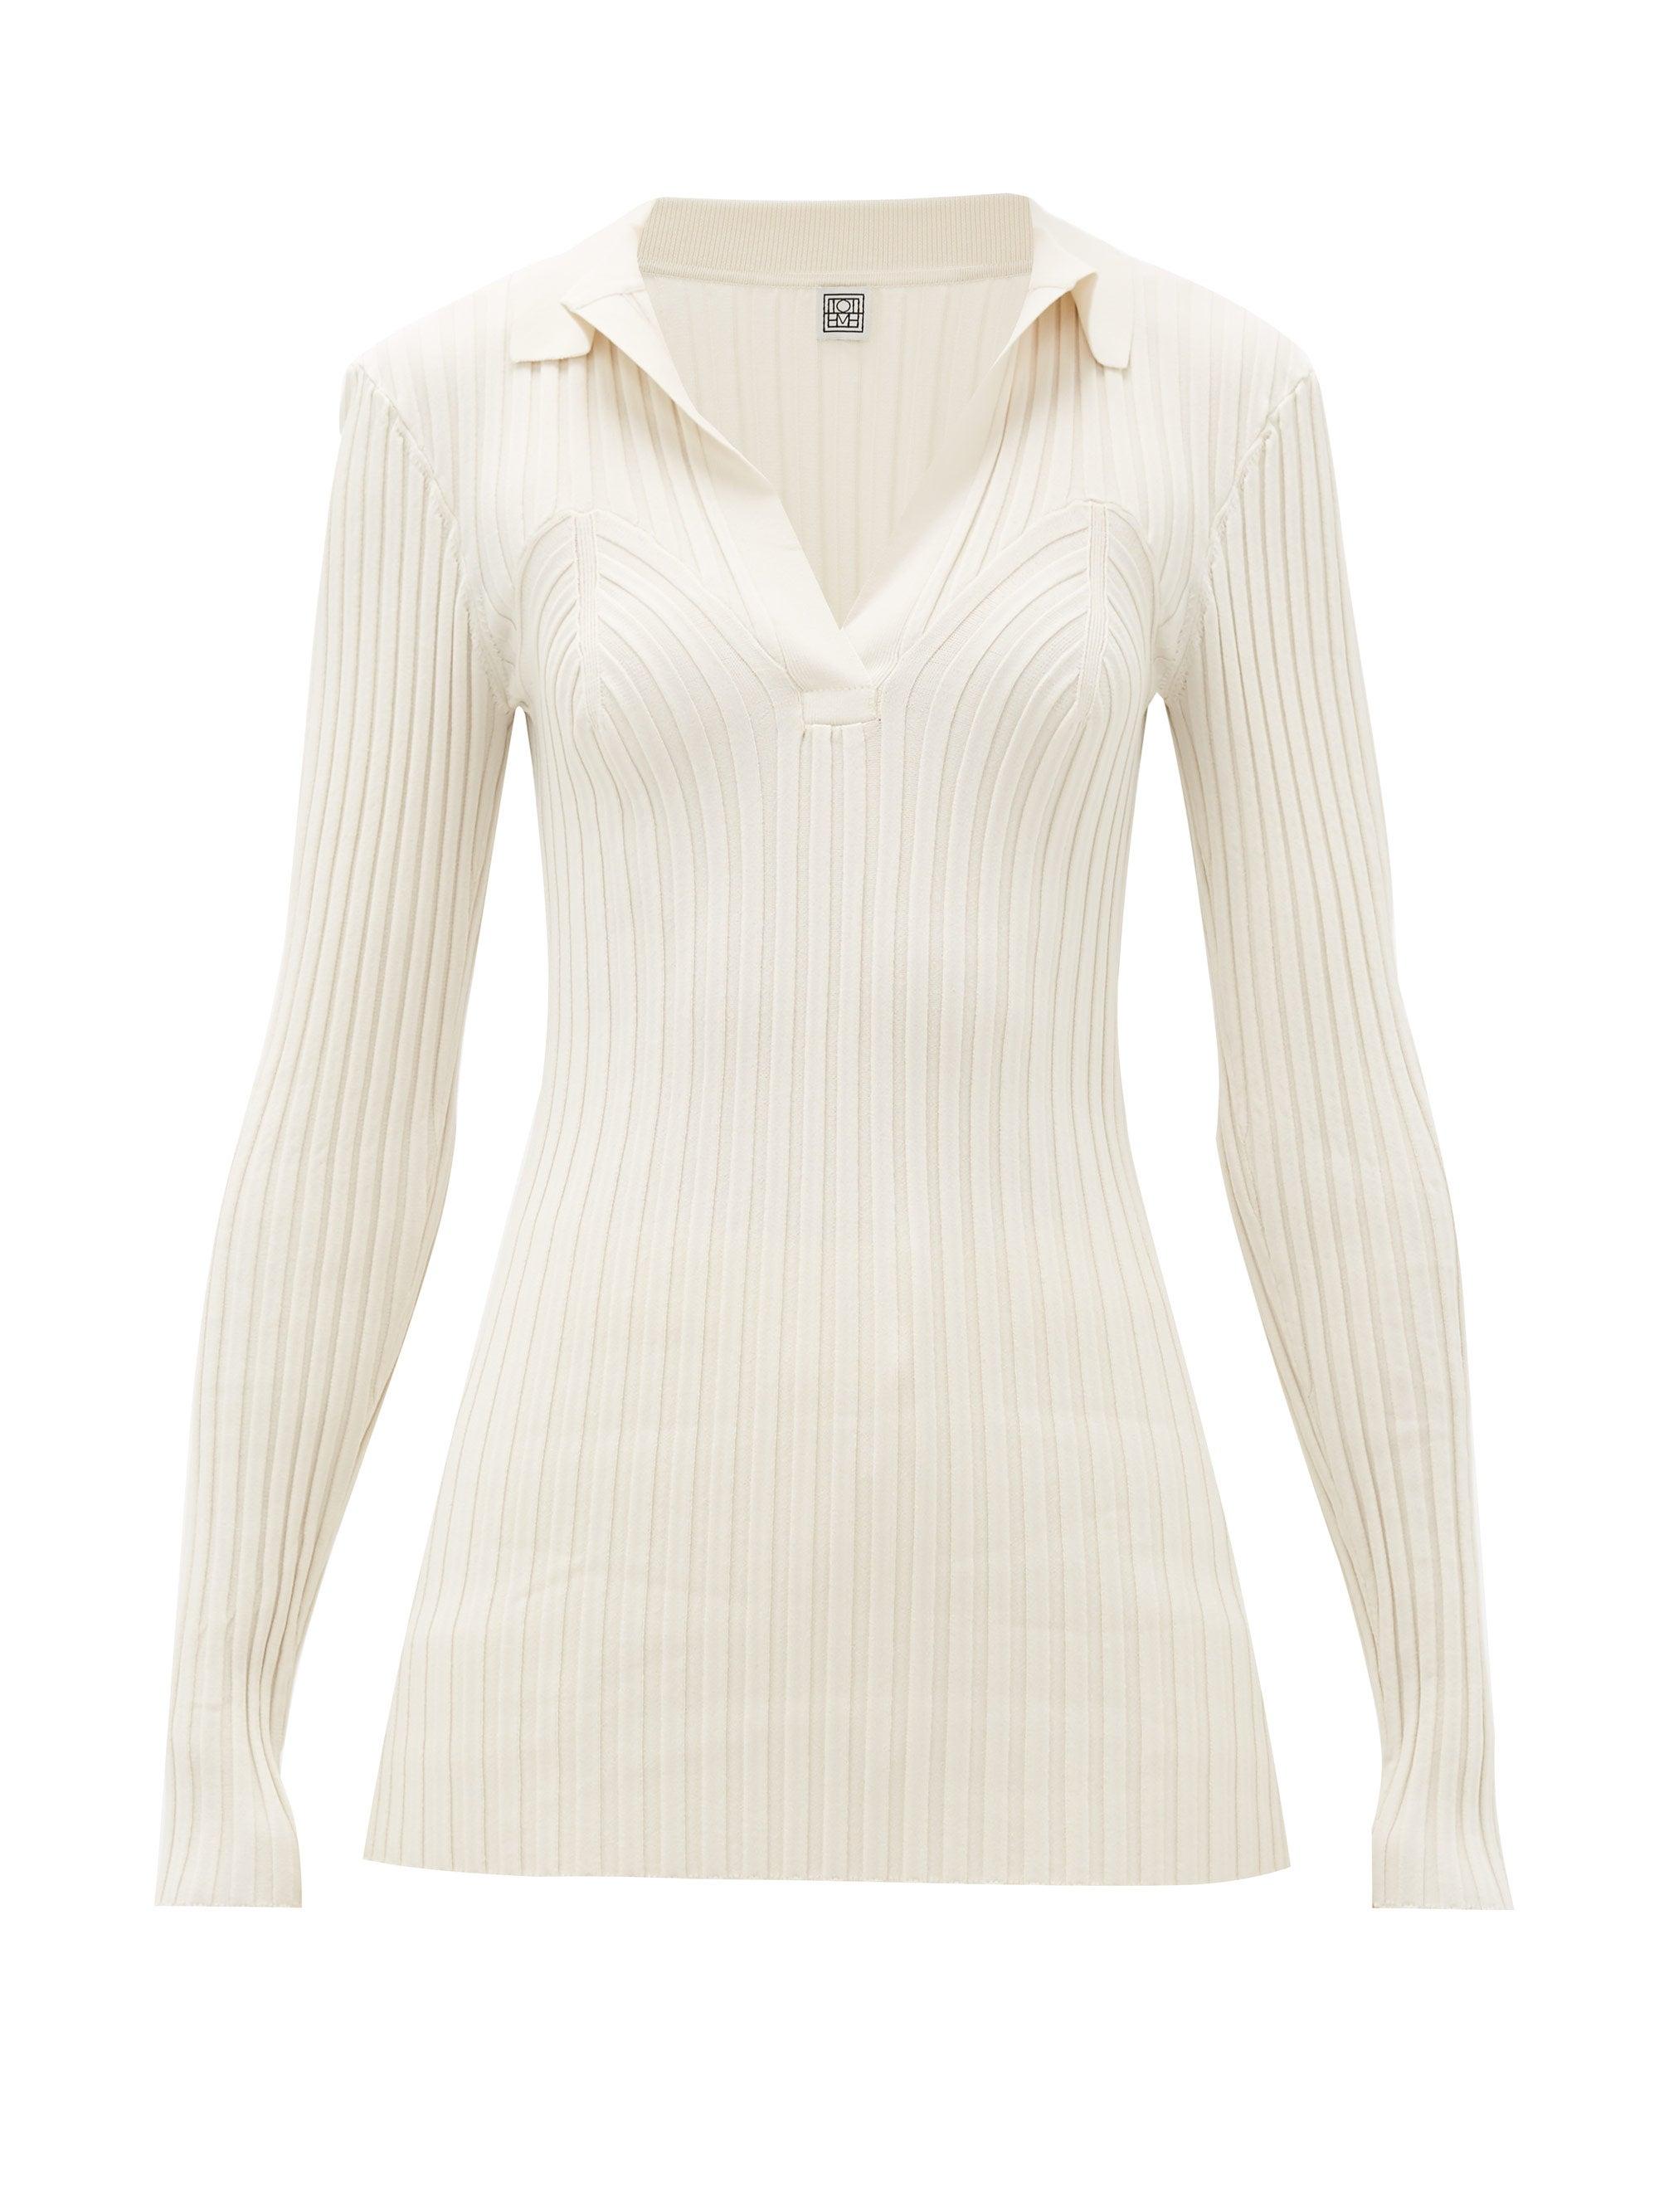 Totême Arradon Ribbed-knit Rayon-blend Top in Ivory (Natural) - Lyst